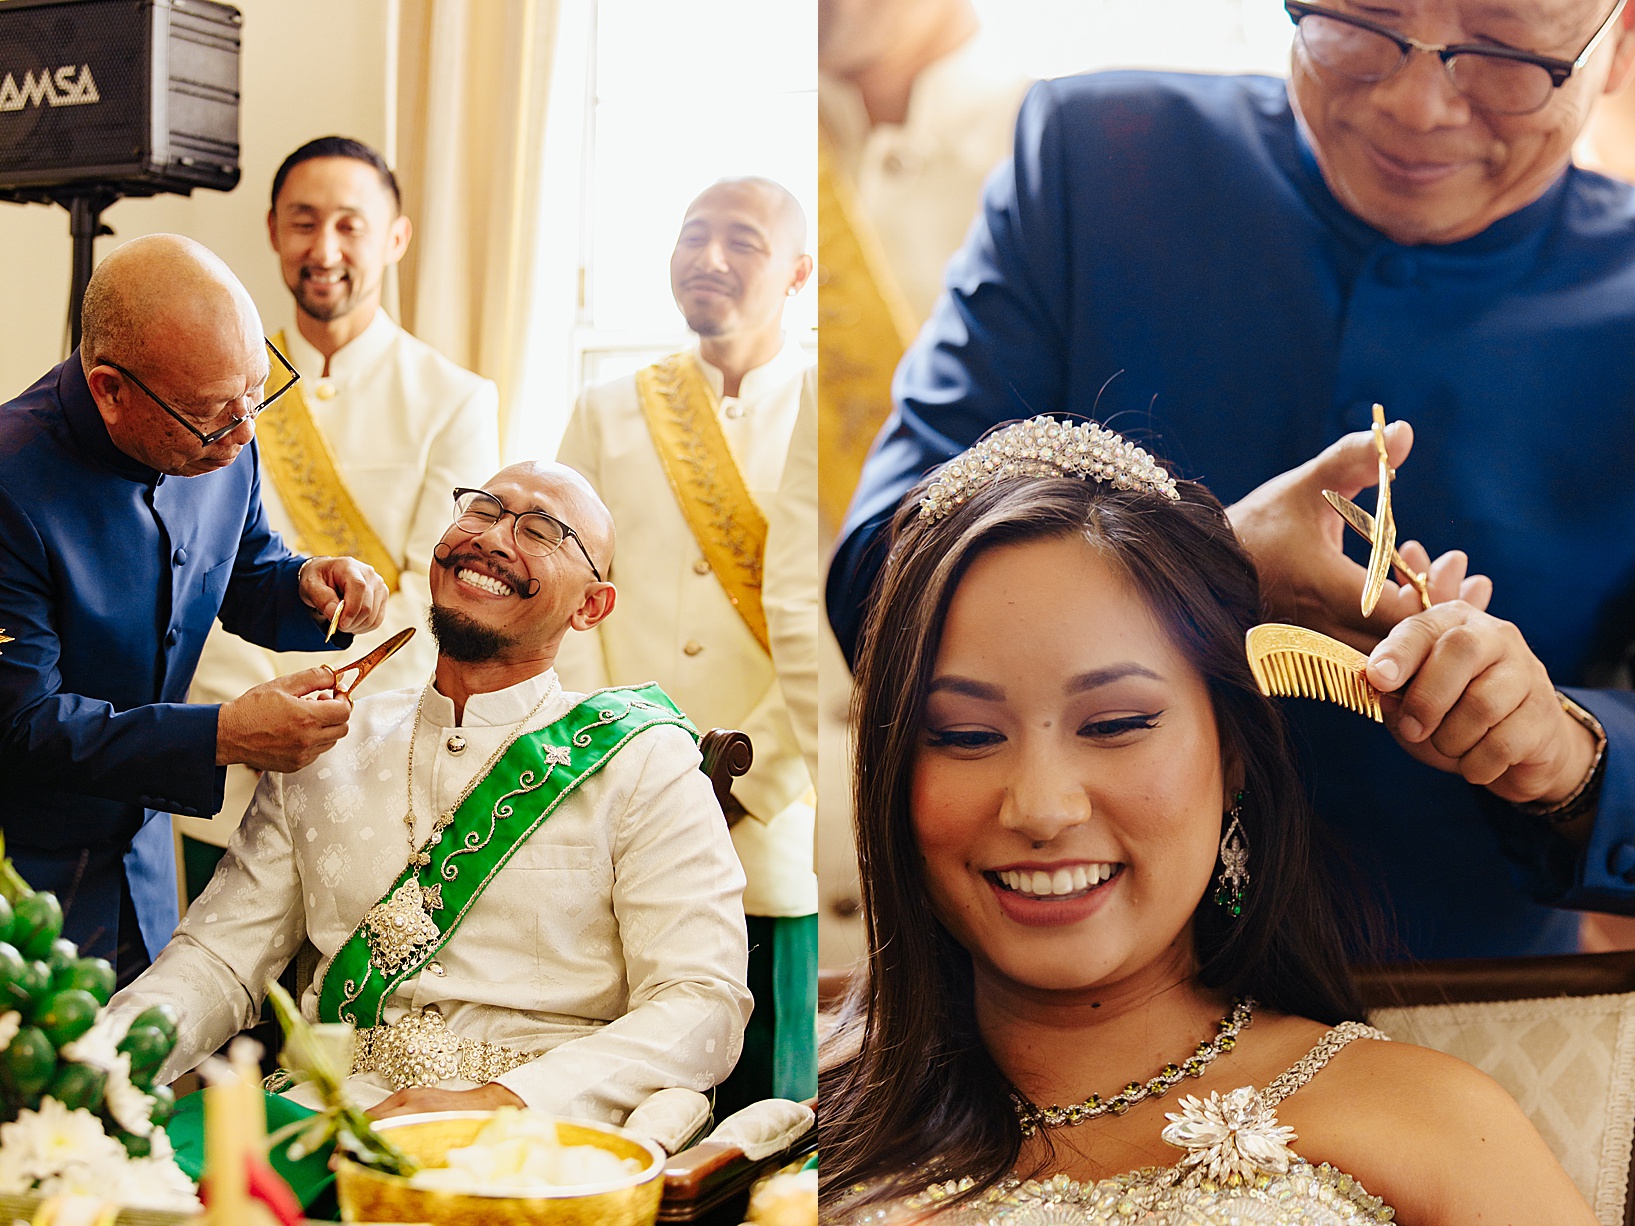 Haircut ceremony for Cambodian wedding in Los Angeles